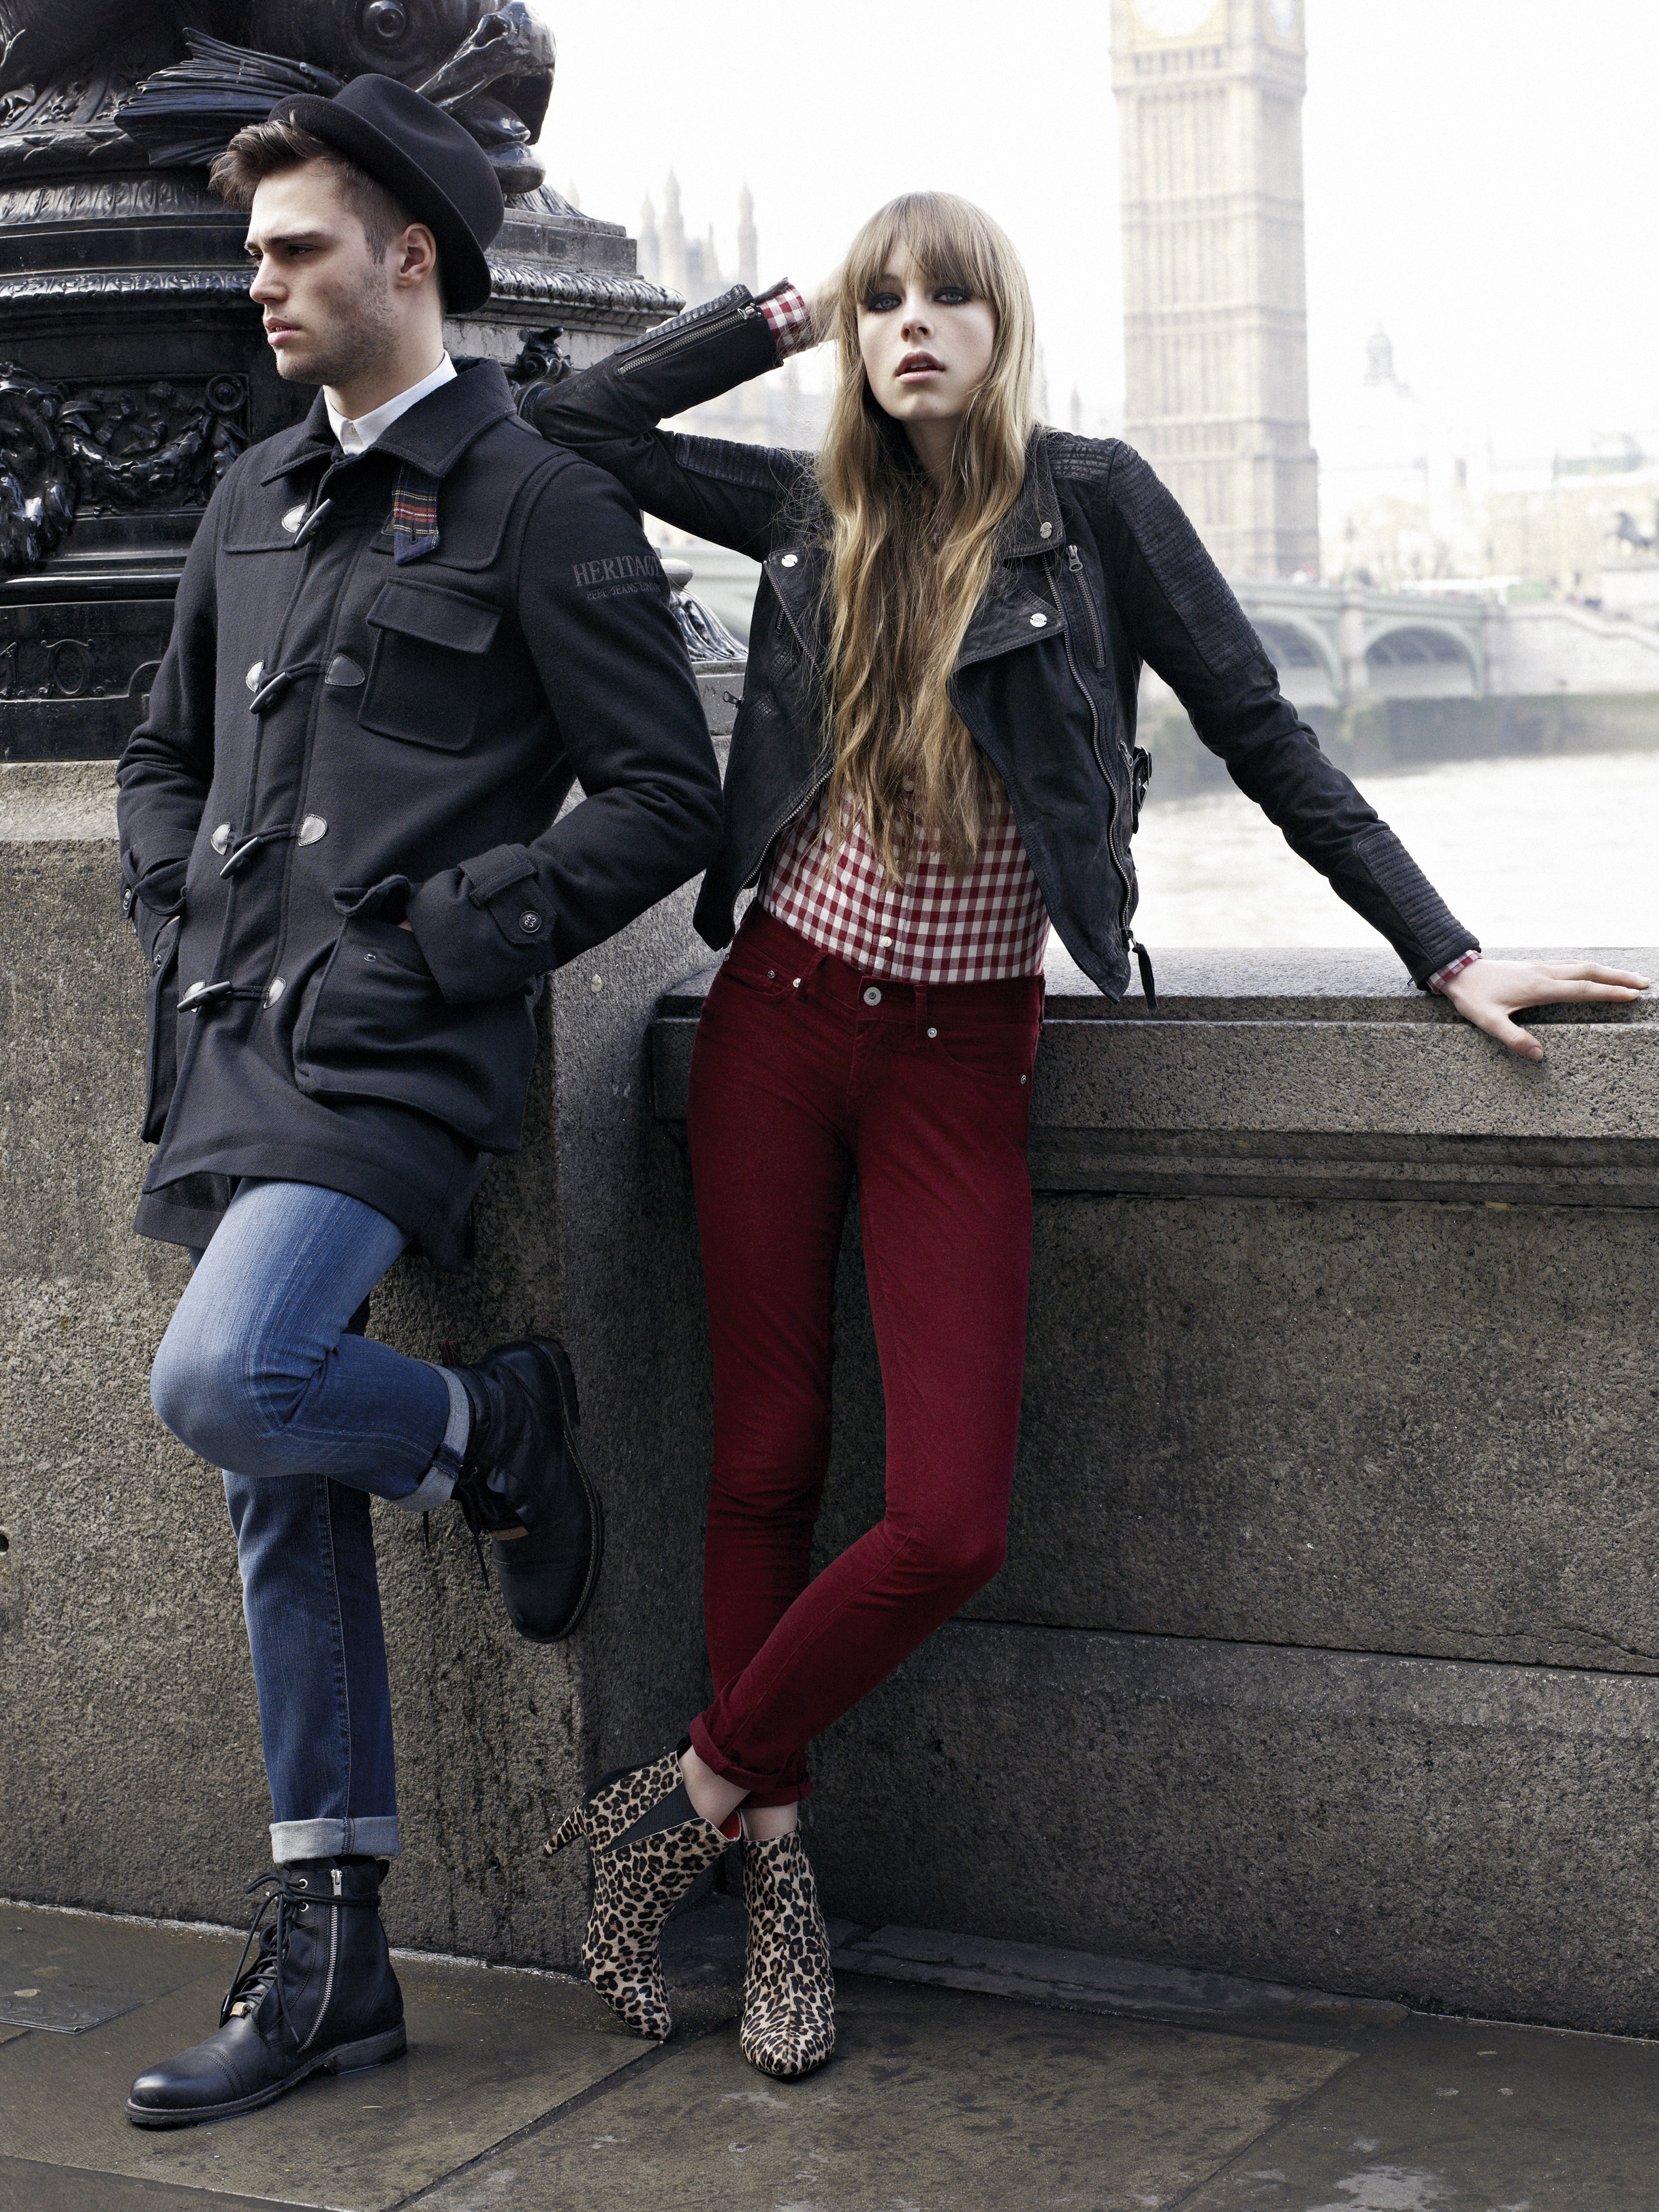 Pepe Jeans AW 2012 Ad Campaign 4